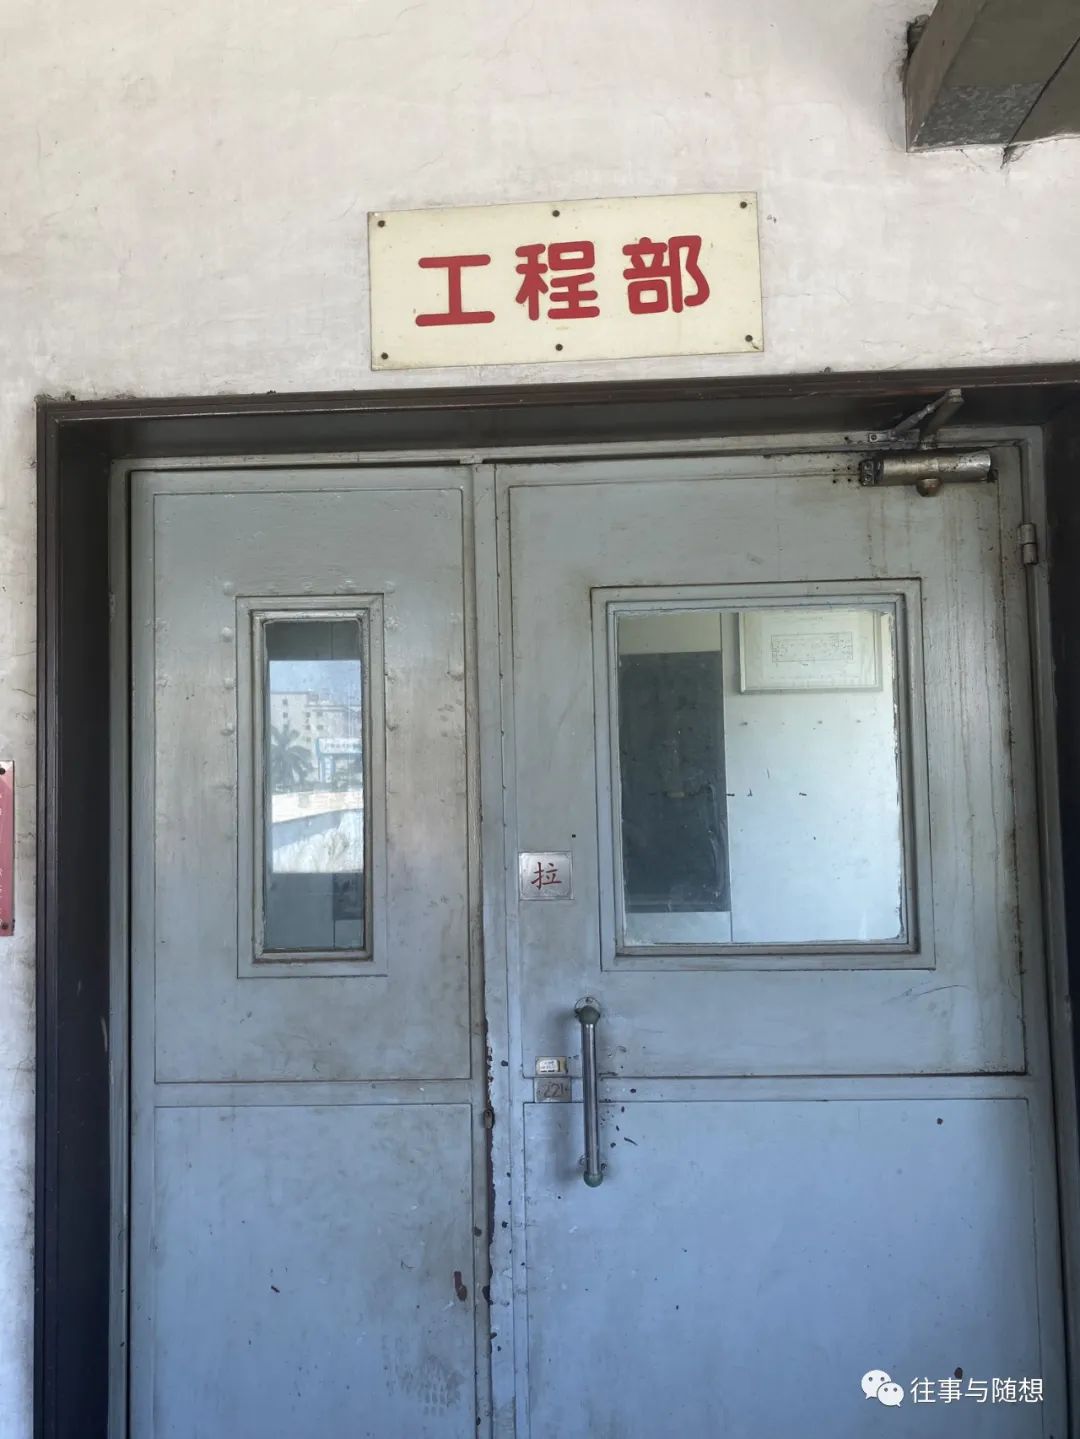 A metal door with a Chinese sign above it, reading "Engineering Department"